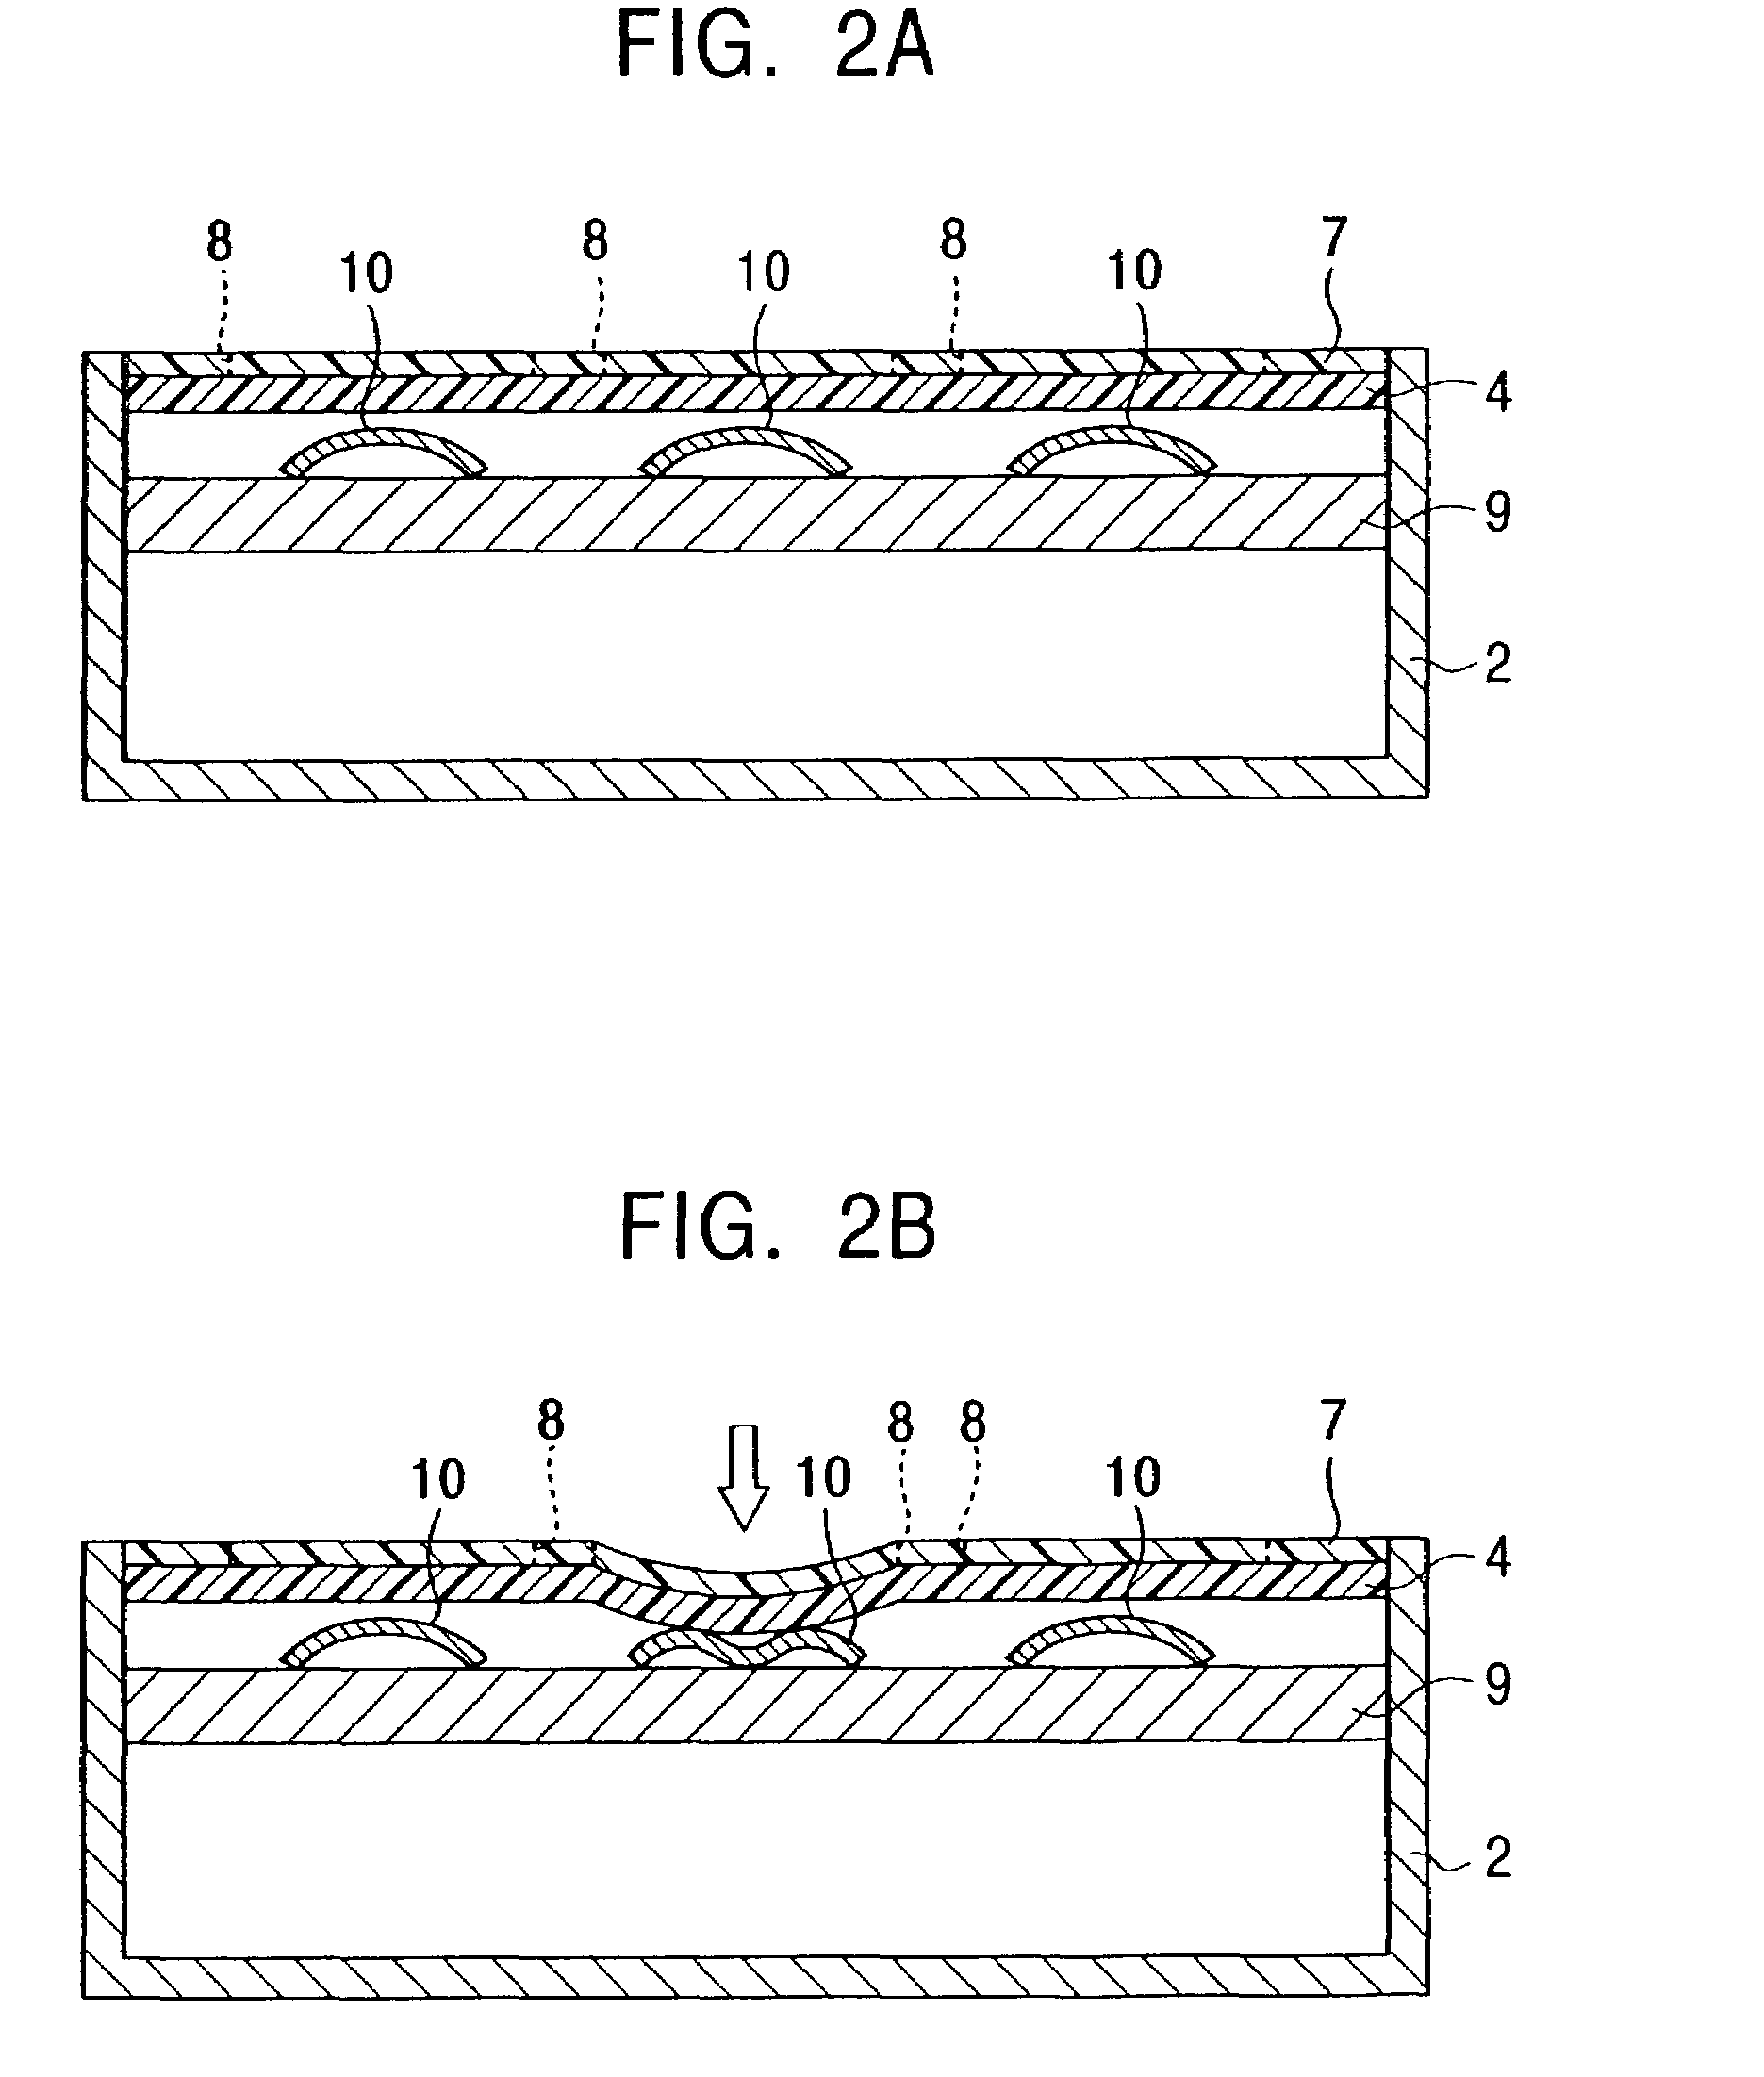 Input apparatus for performing input operation corresponding to indication marks and coordinate input operation on the same operational plane